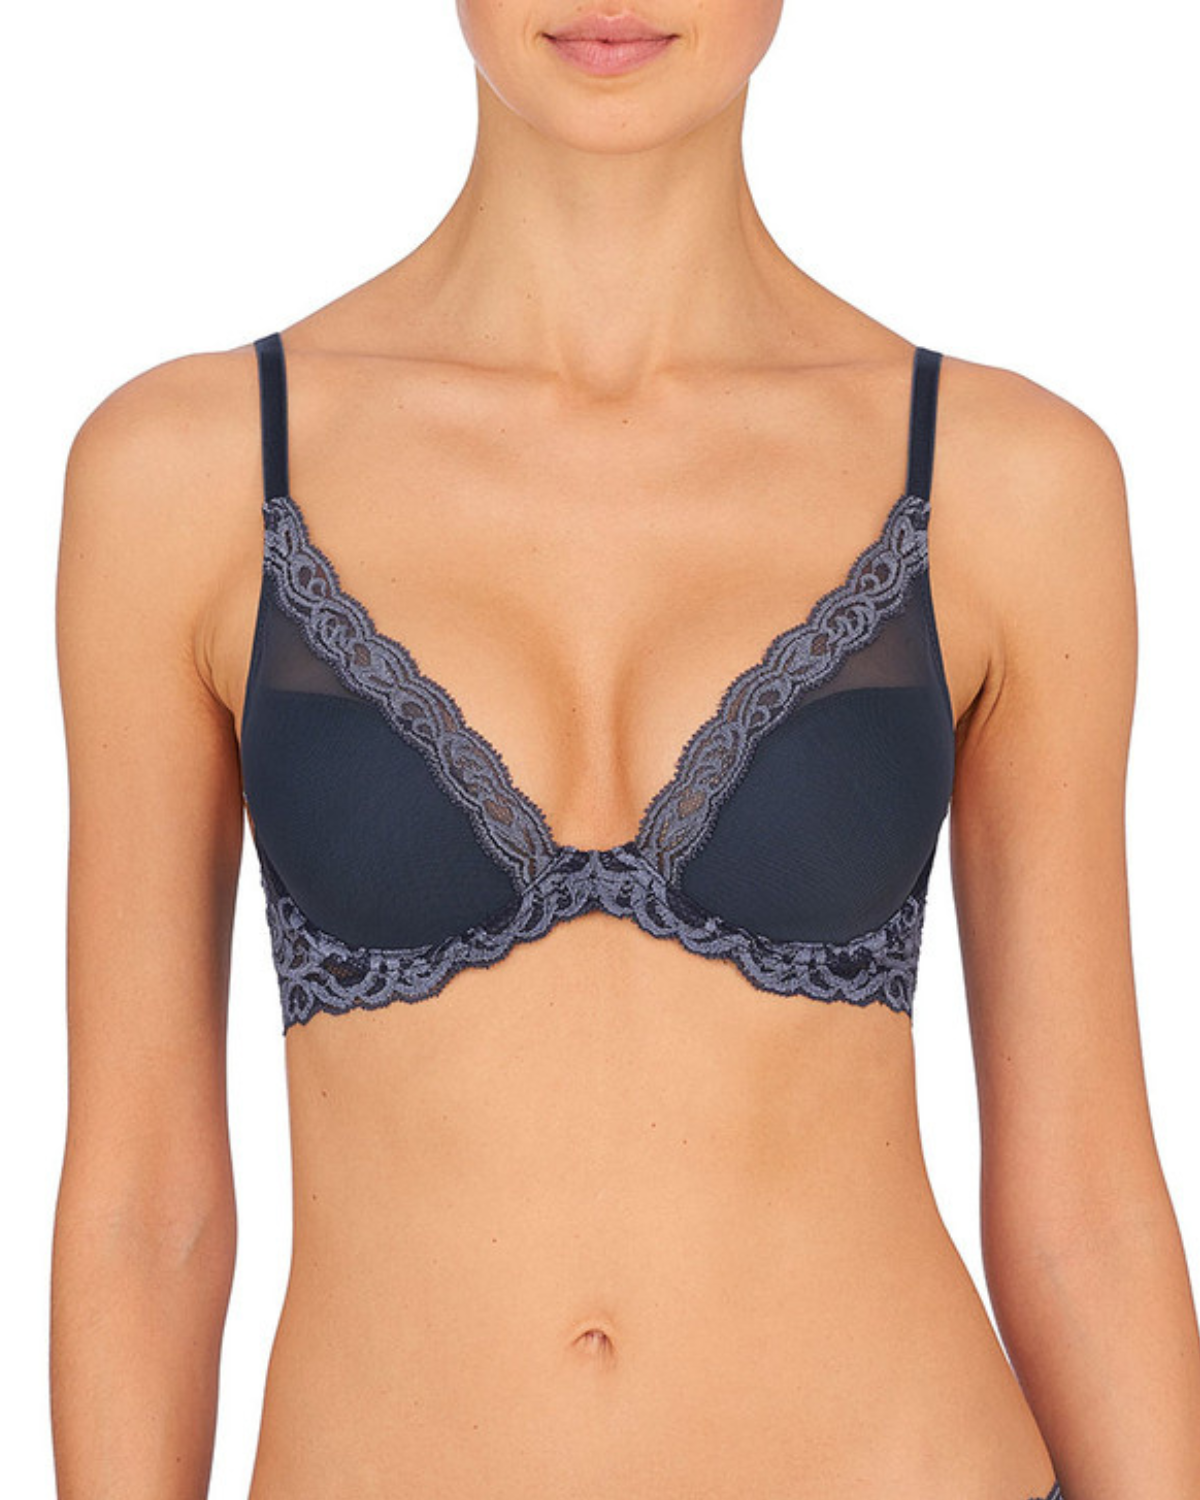 Natori Feathers Plunge Bra  (More colors available) - 730023